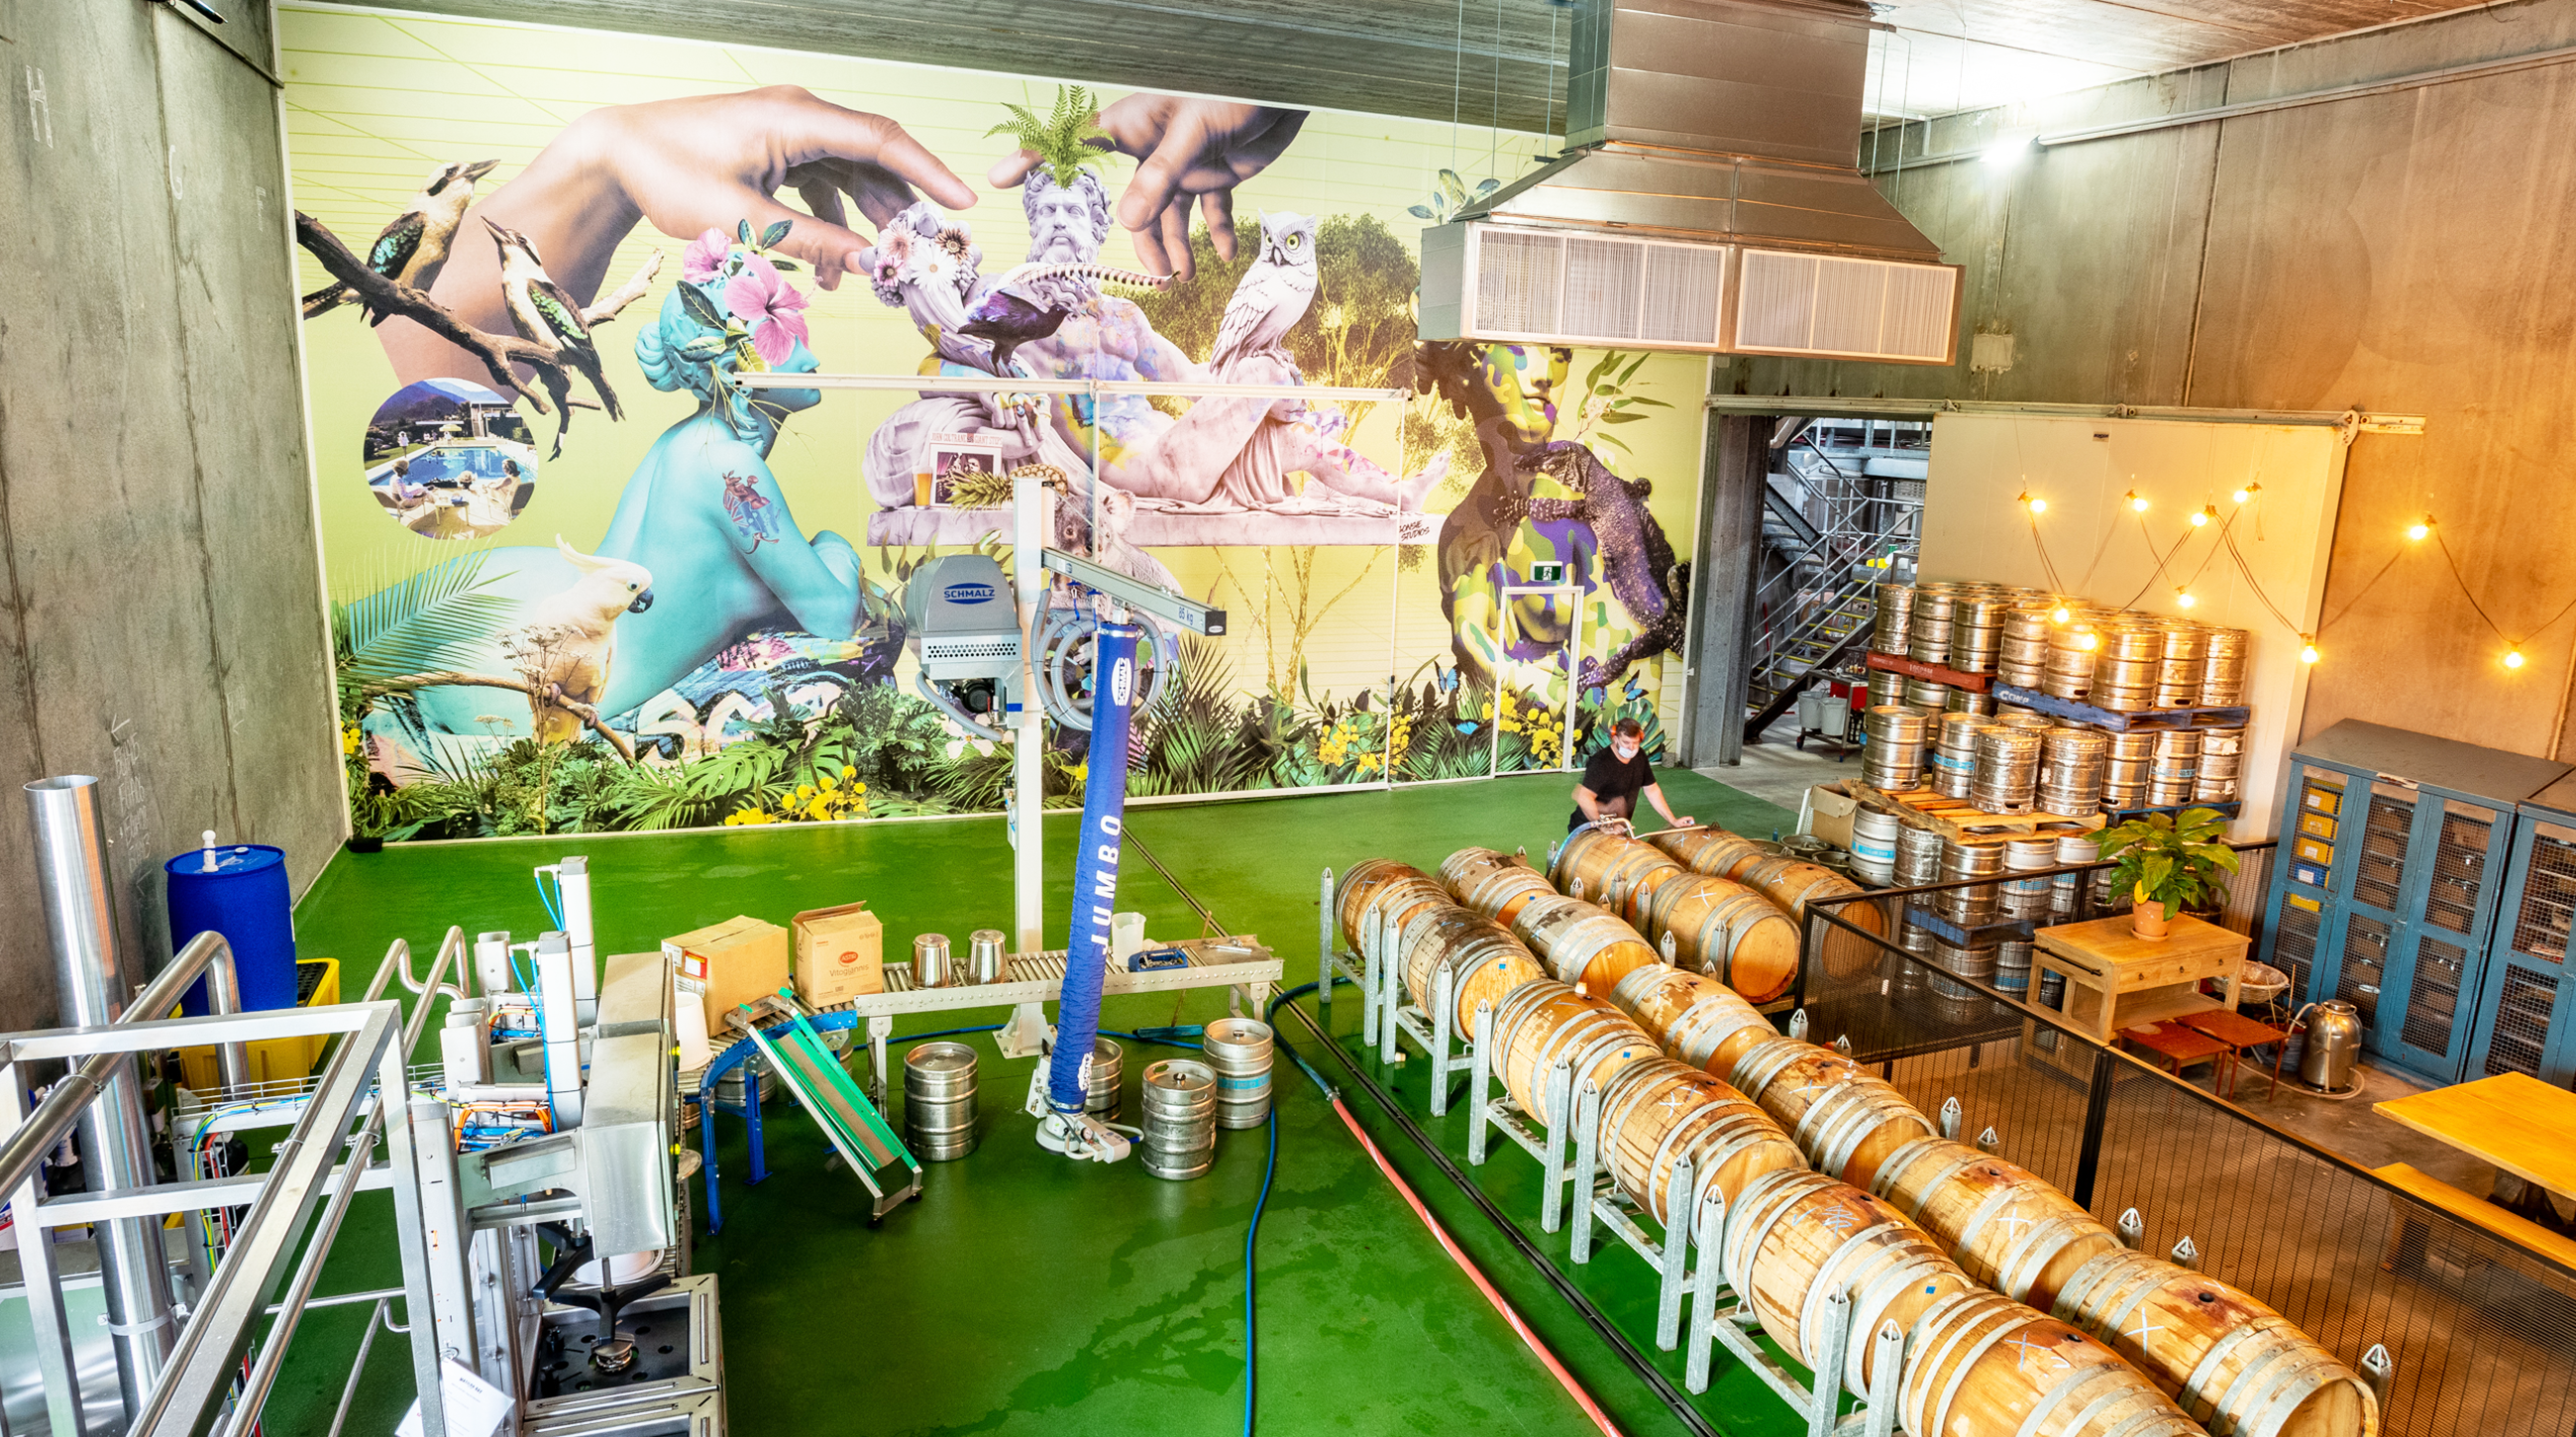 Landscape view of the Matilda Bay Brewery with the mural.